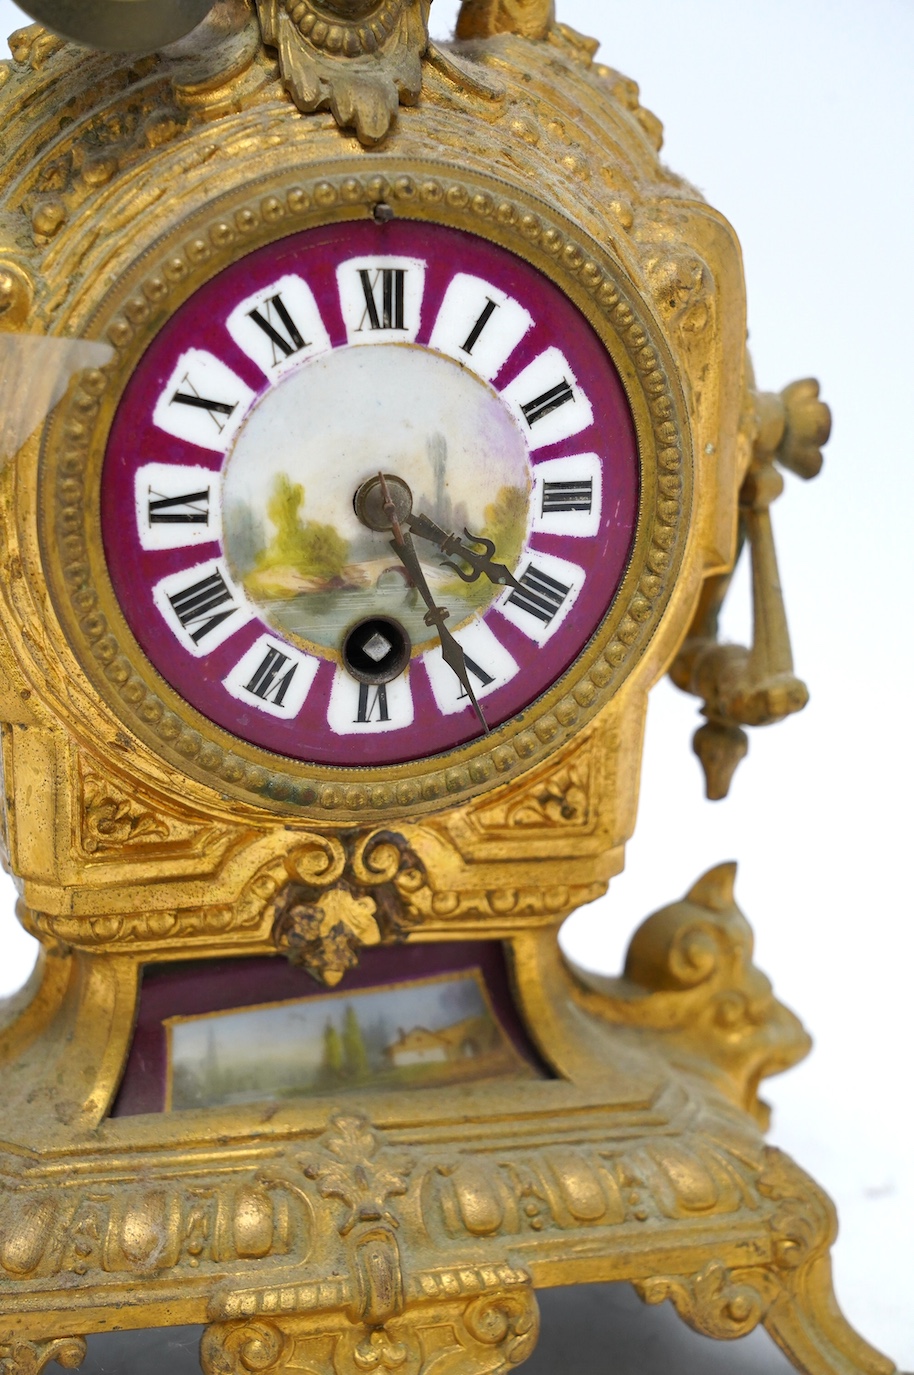 A 19th century gilt spelter mantel clock, with ceramic decorated dial and panel, 30cm high. Condition - not checked if in working condition, case fair